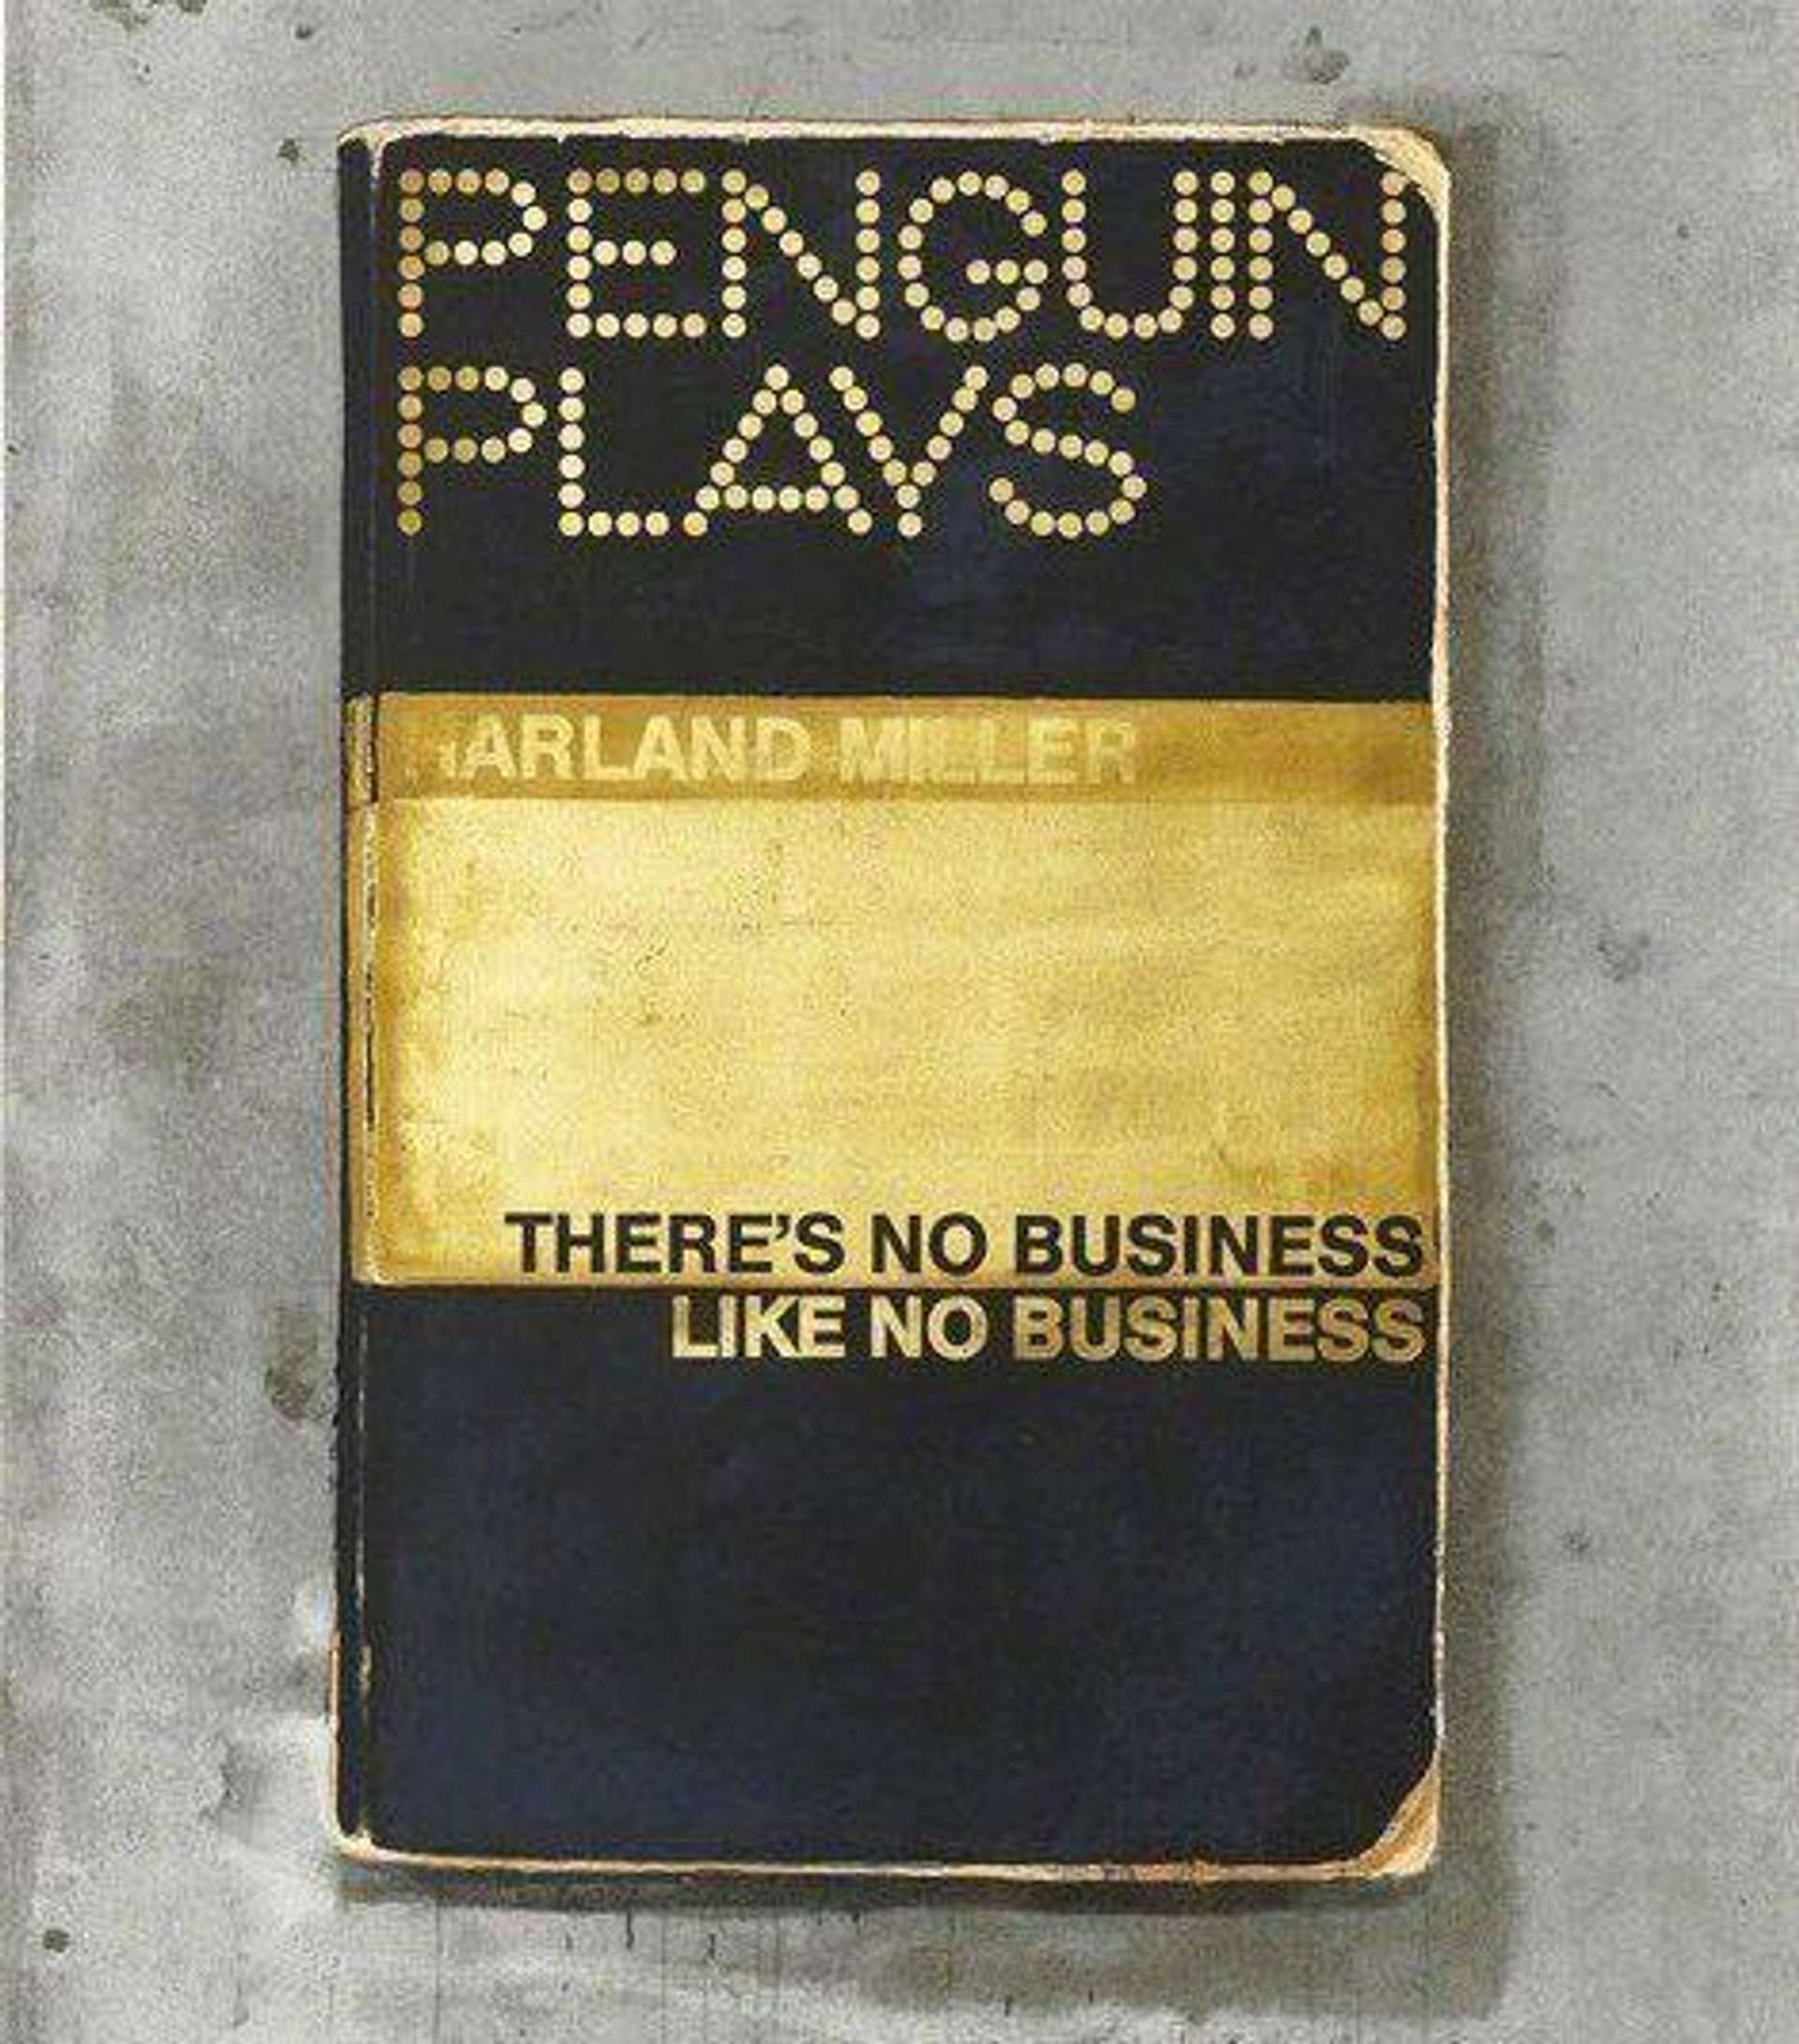 There’s No Business Like No Business by Harland Miller